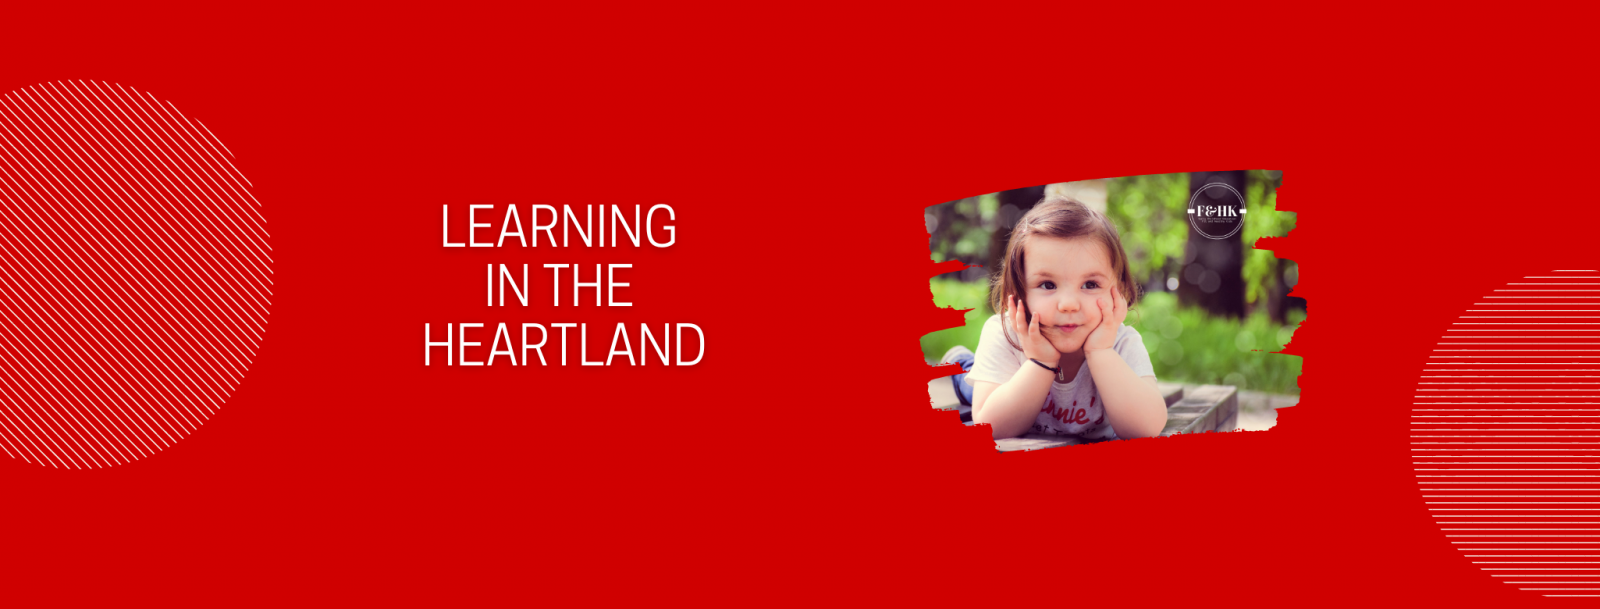 Learning in the Heartland Graphic